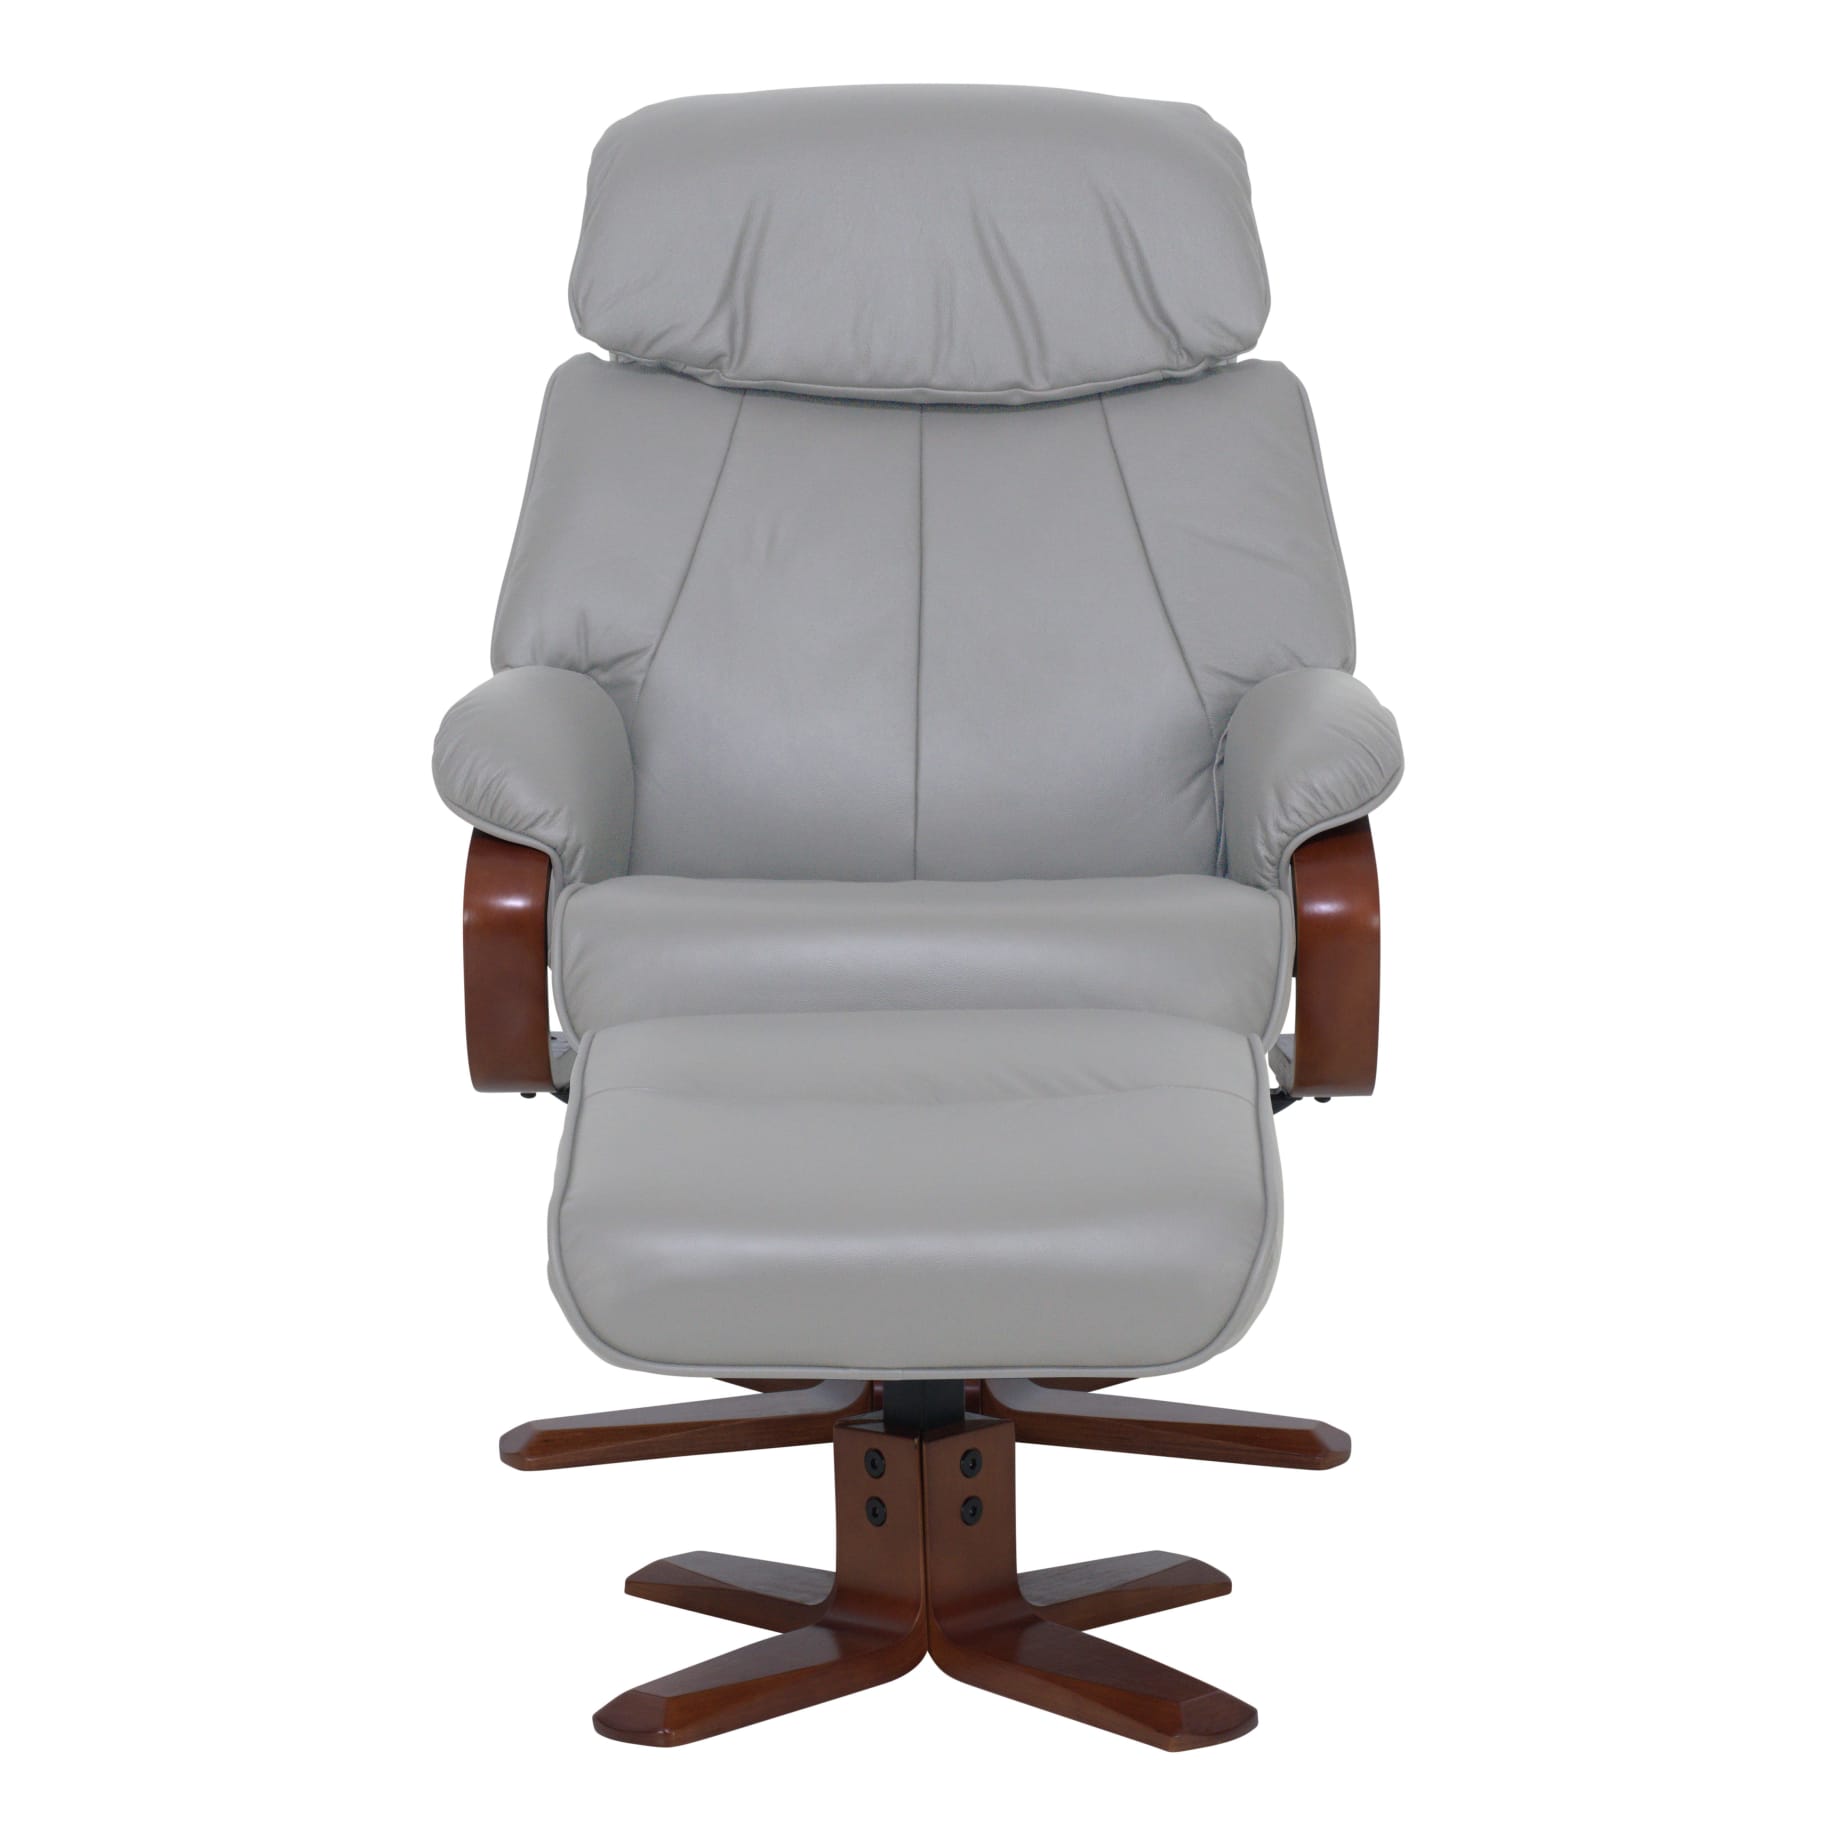 Turner Recliner + Ottoman in Grey/ Chocolate